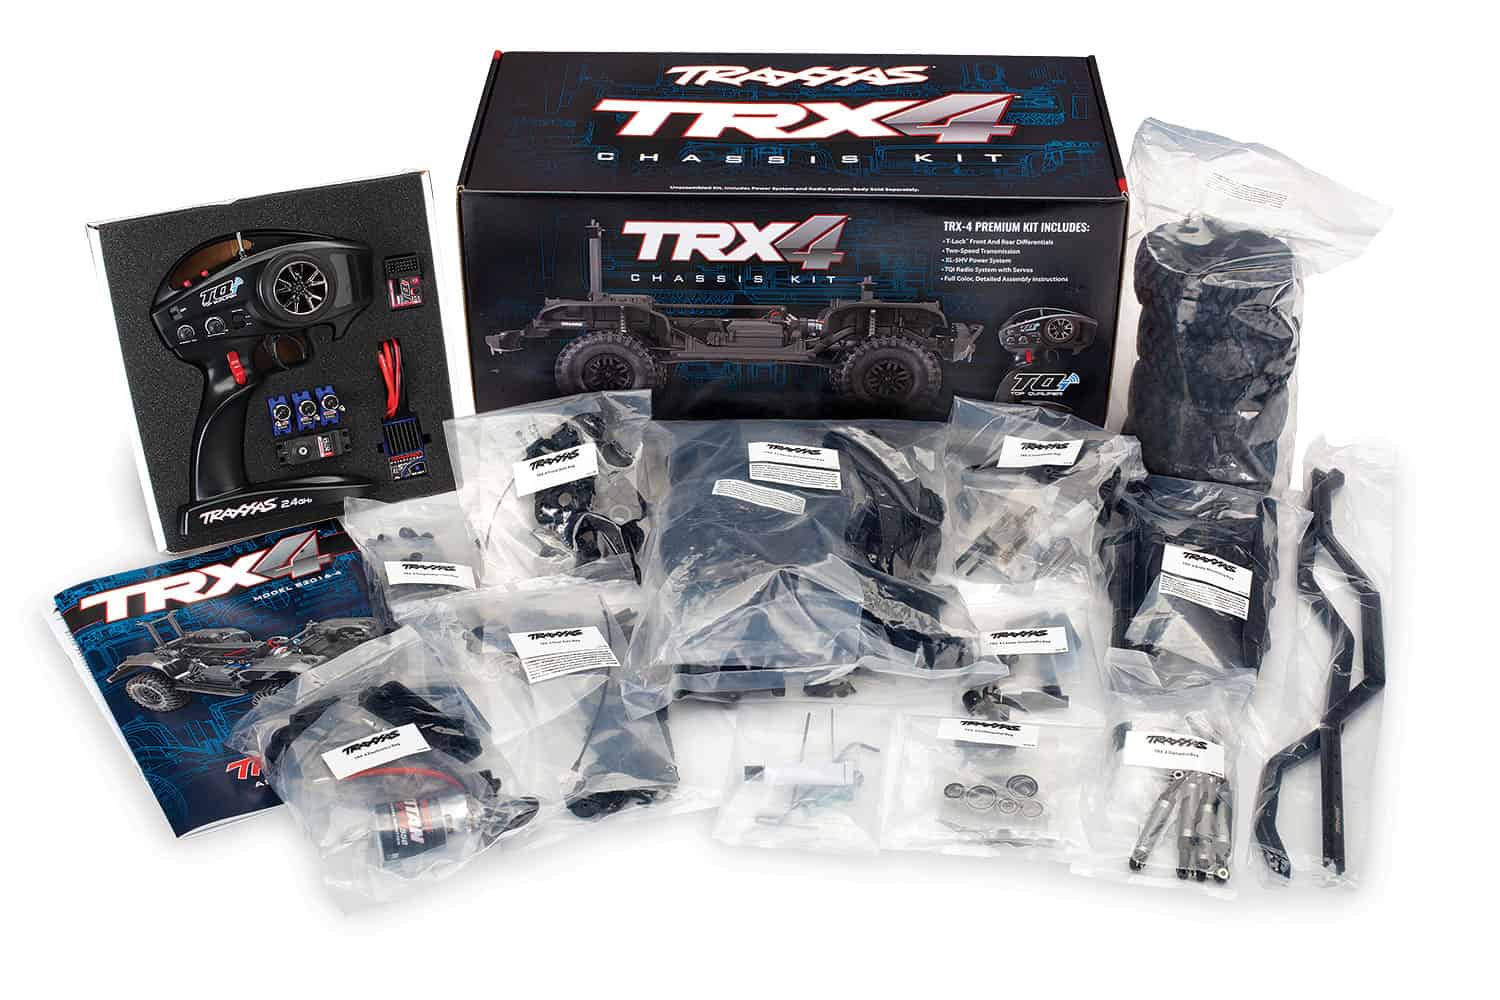 Traxxas TRX-4 Assembly Kit - What's Included